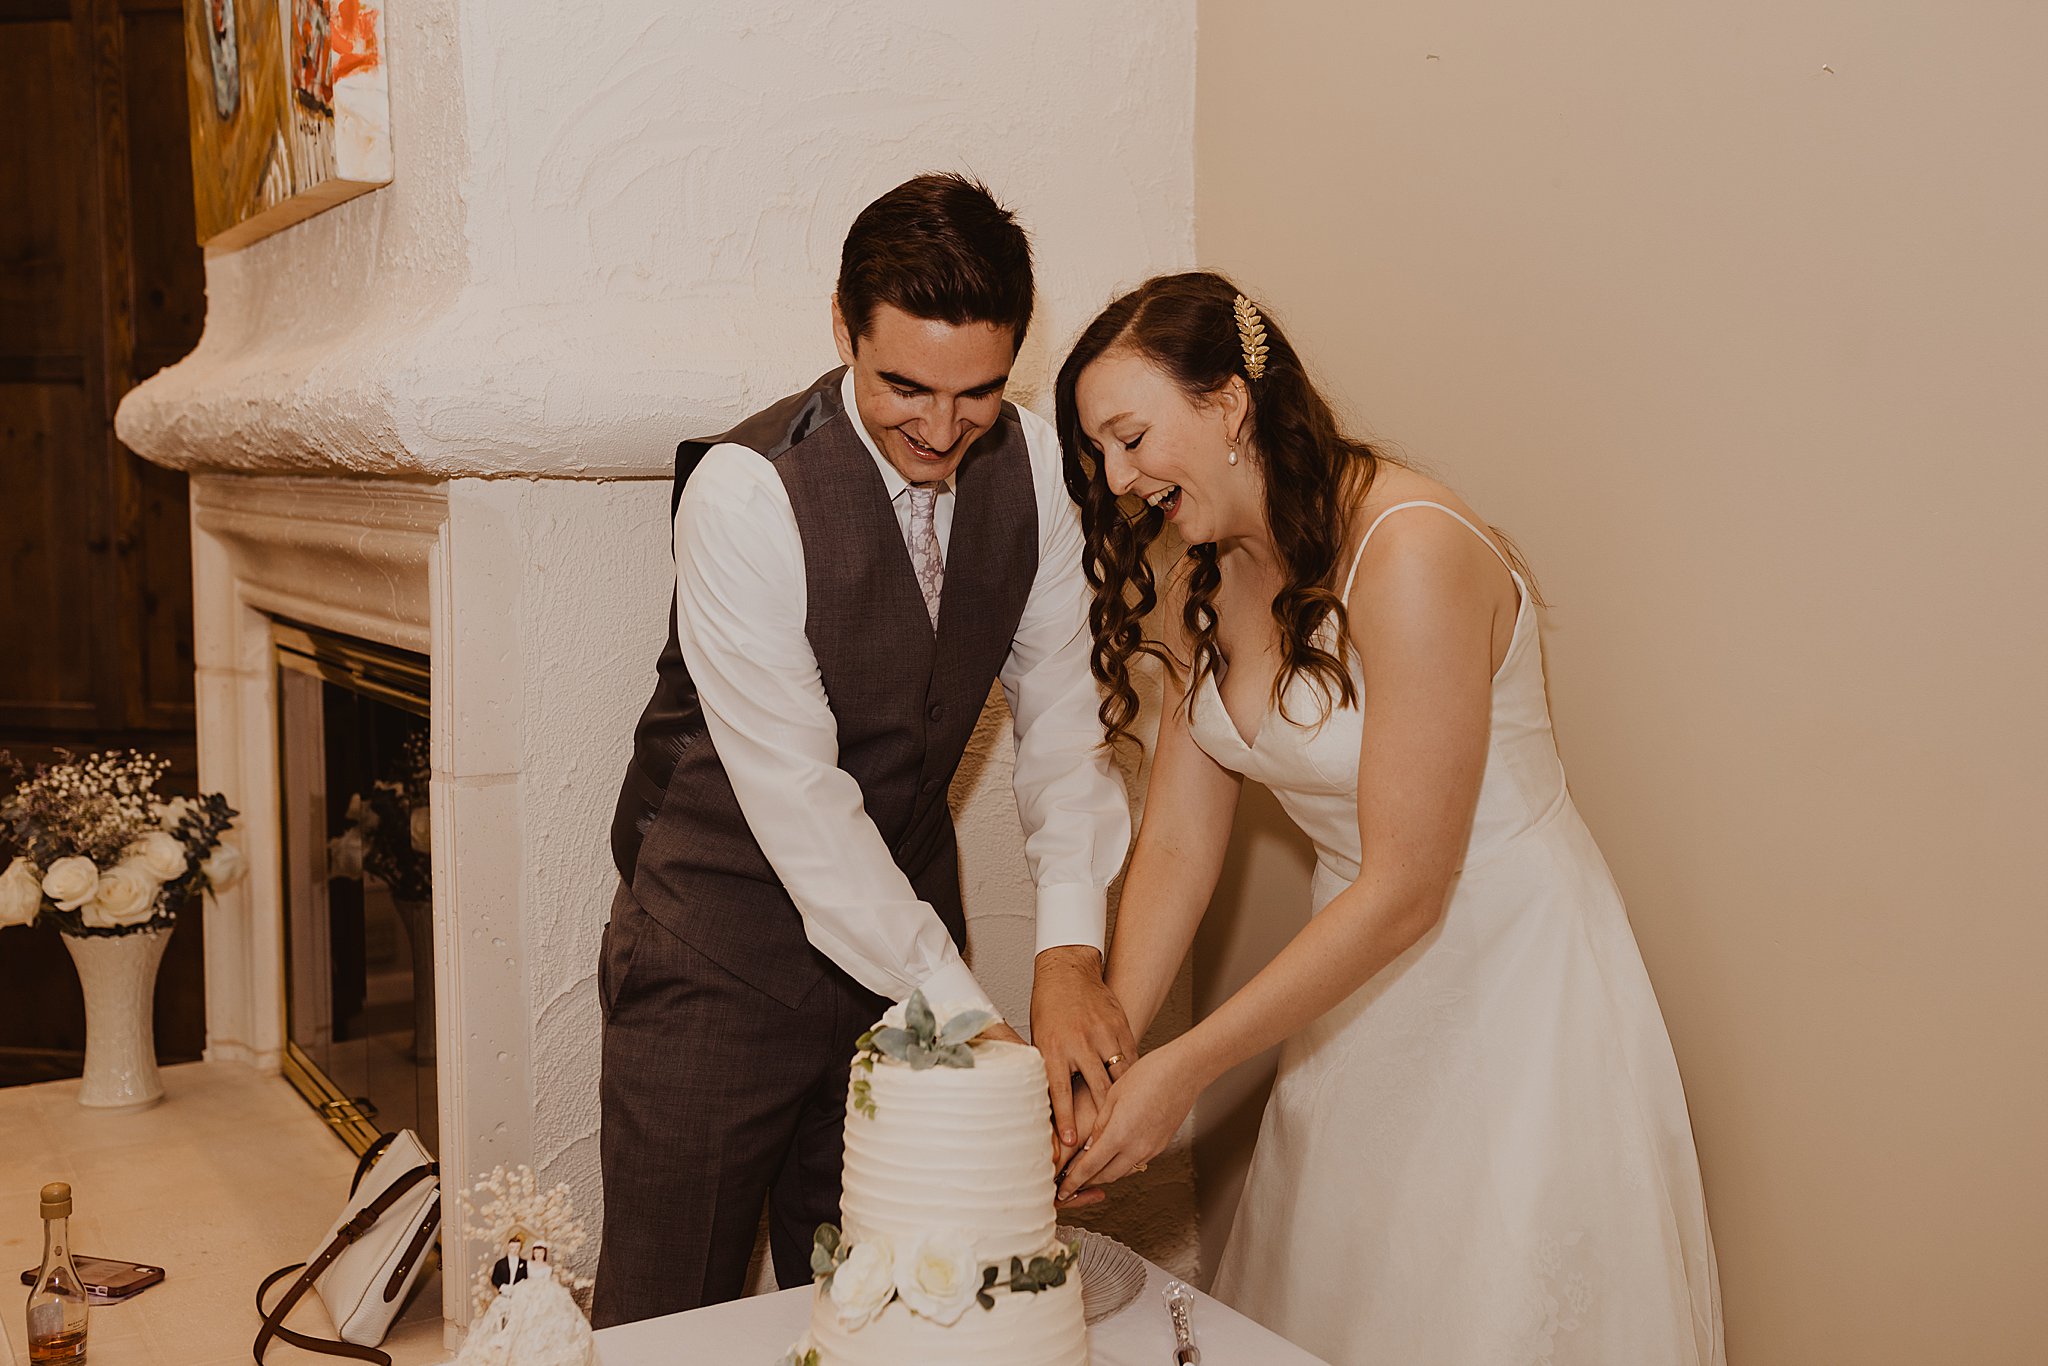 Bride and Groom Cutting Cake